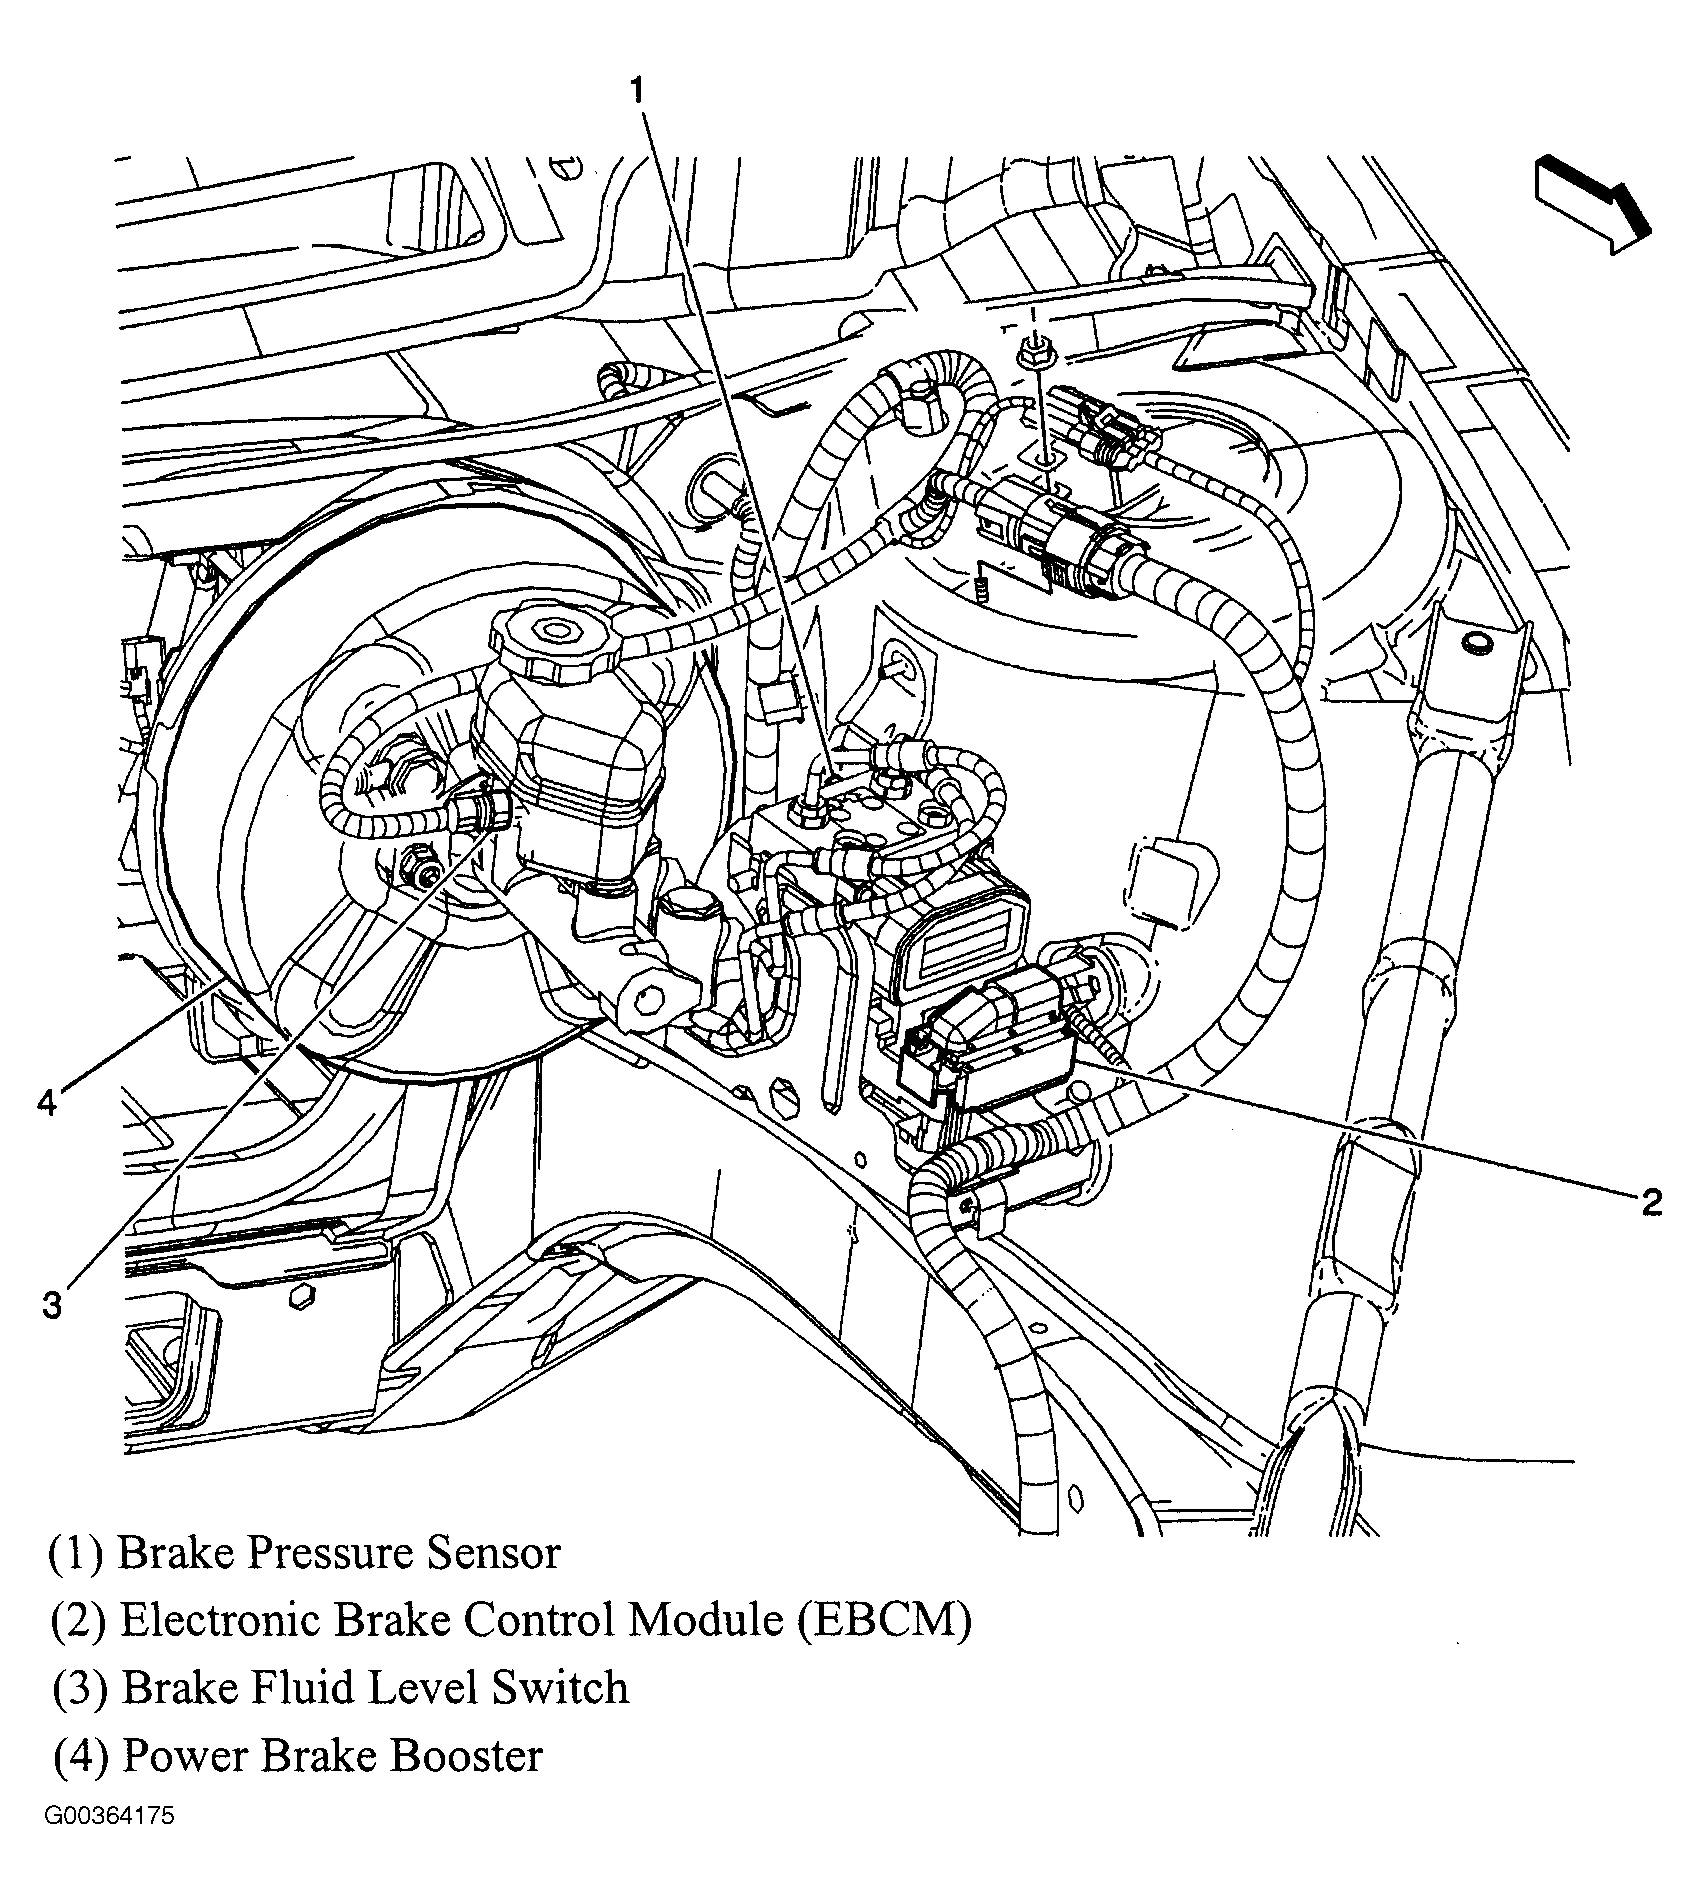 Buick LaCrosse CX 2005 - Component Locations -  Left Rear Of Engine Compartment